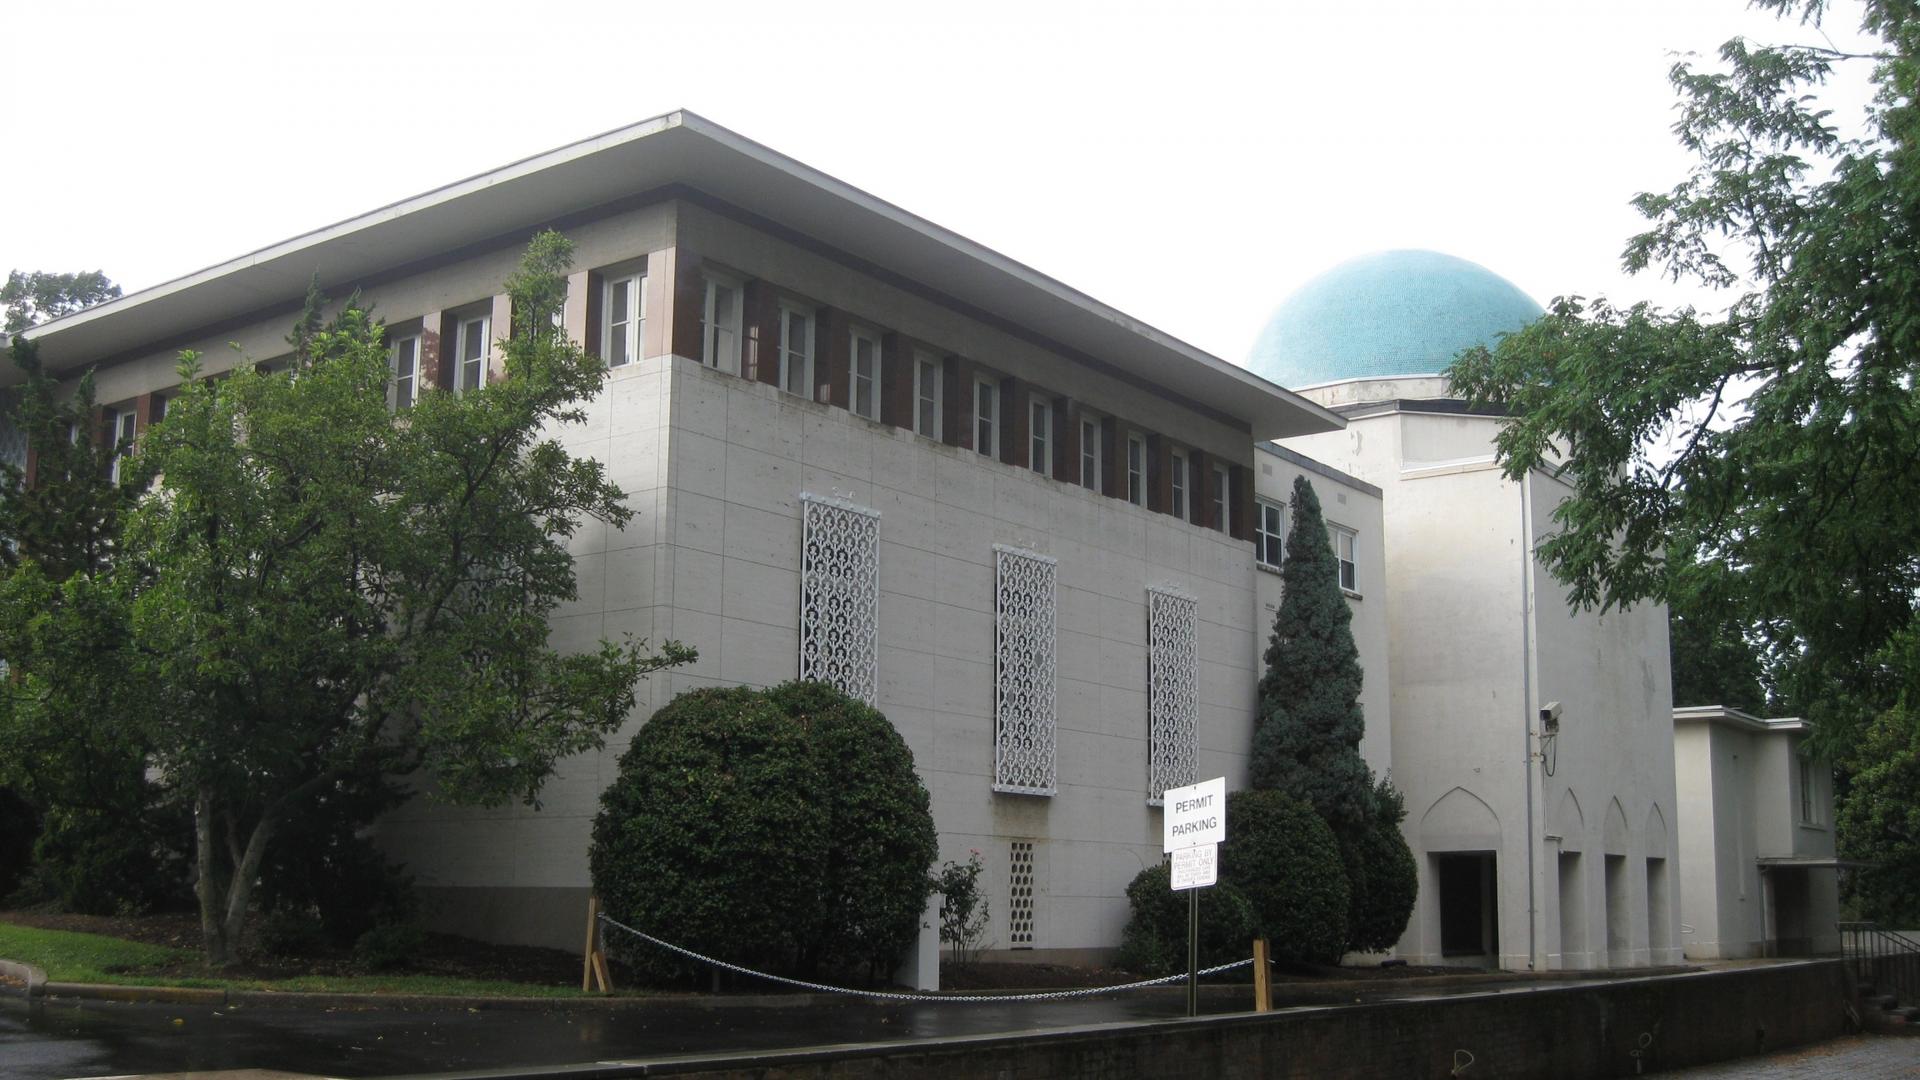 The former Iranian Embassy in Washington, DC. The US State Department is the current custodian of the building, which was built in 1959.